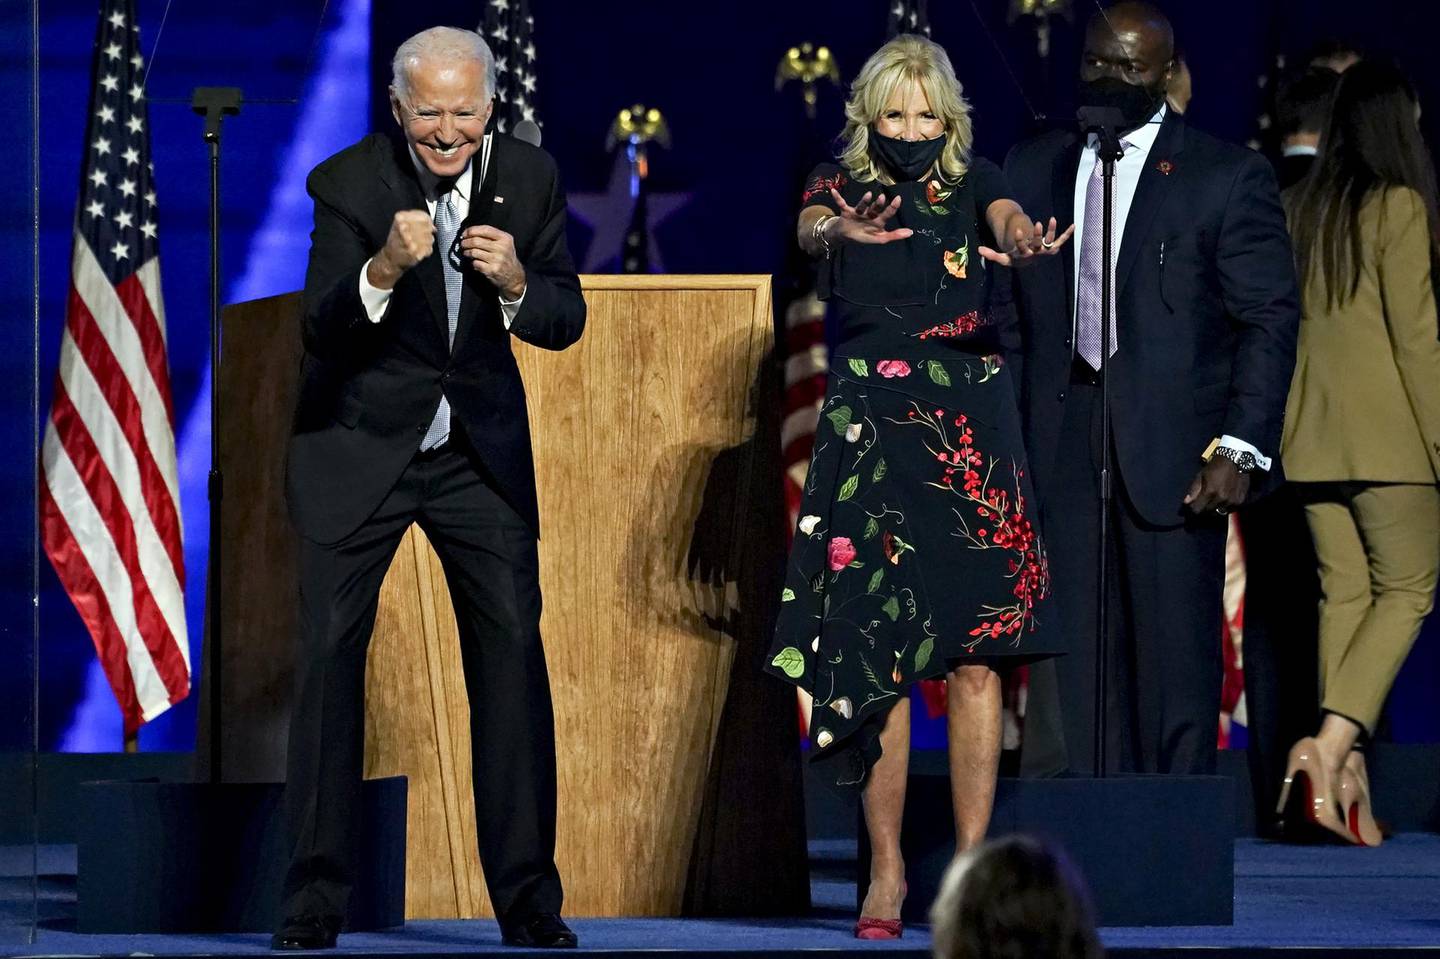 U.S. President-elect Joe Biden, left, and wife Jill Biden gesture to the audience during an election event in Wilmington, Delaware, U.S., on Saturday, Nov. 7, 2020. Biden defeated Donald Trump to become the 46th U.S. president, unseating the incumbent with a pledge to unify and mend a nation reeling from a worsening pandemic, faltering economy and deep political divisions. Photographer: Sarah Silbiger/Bloomberg